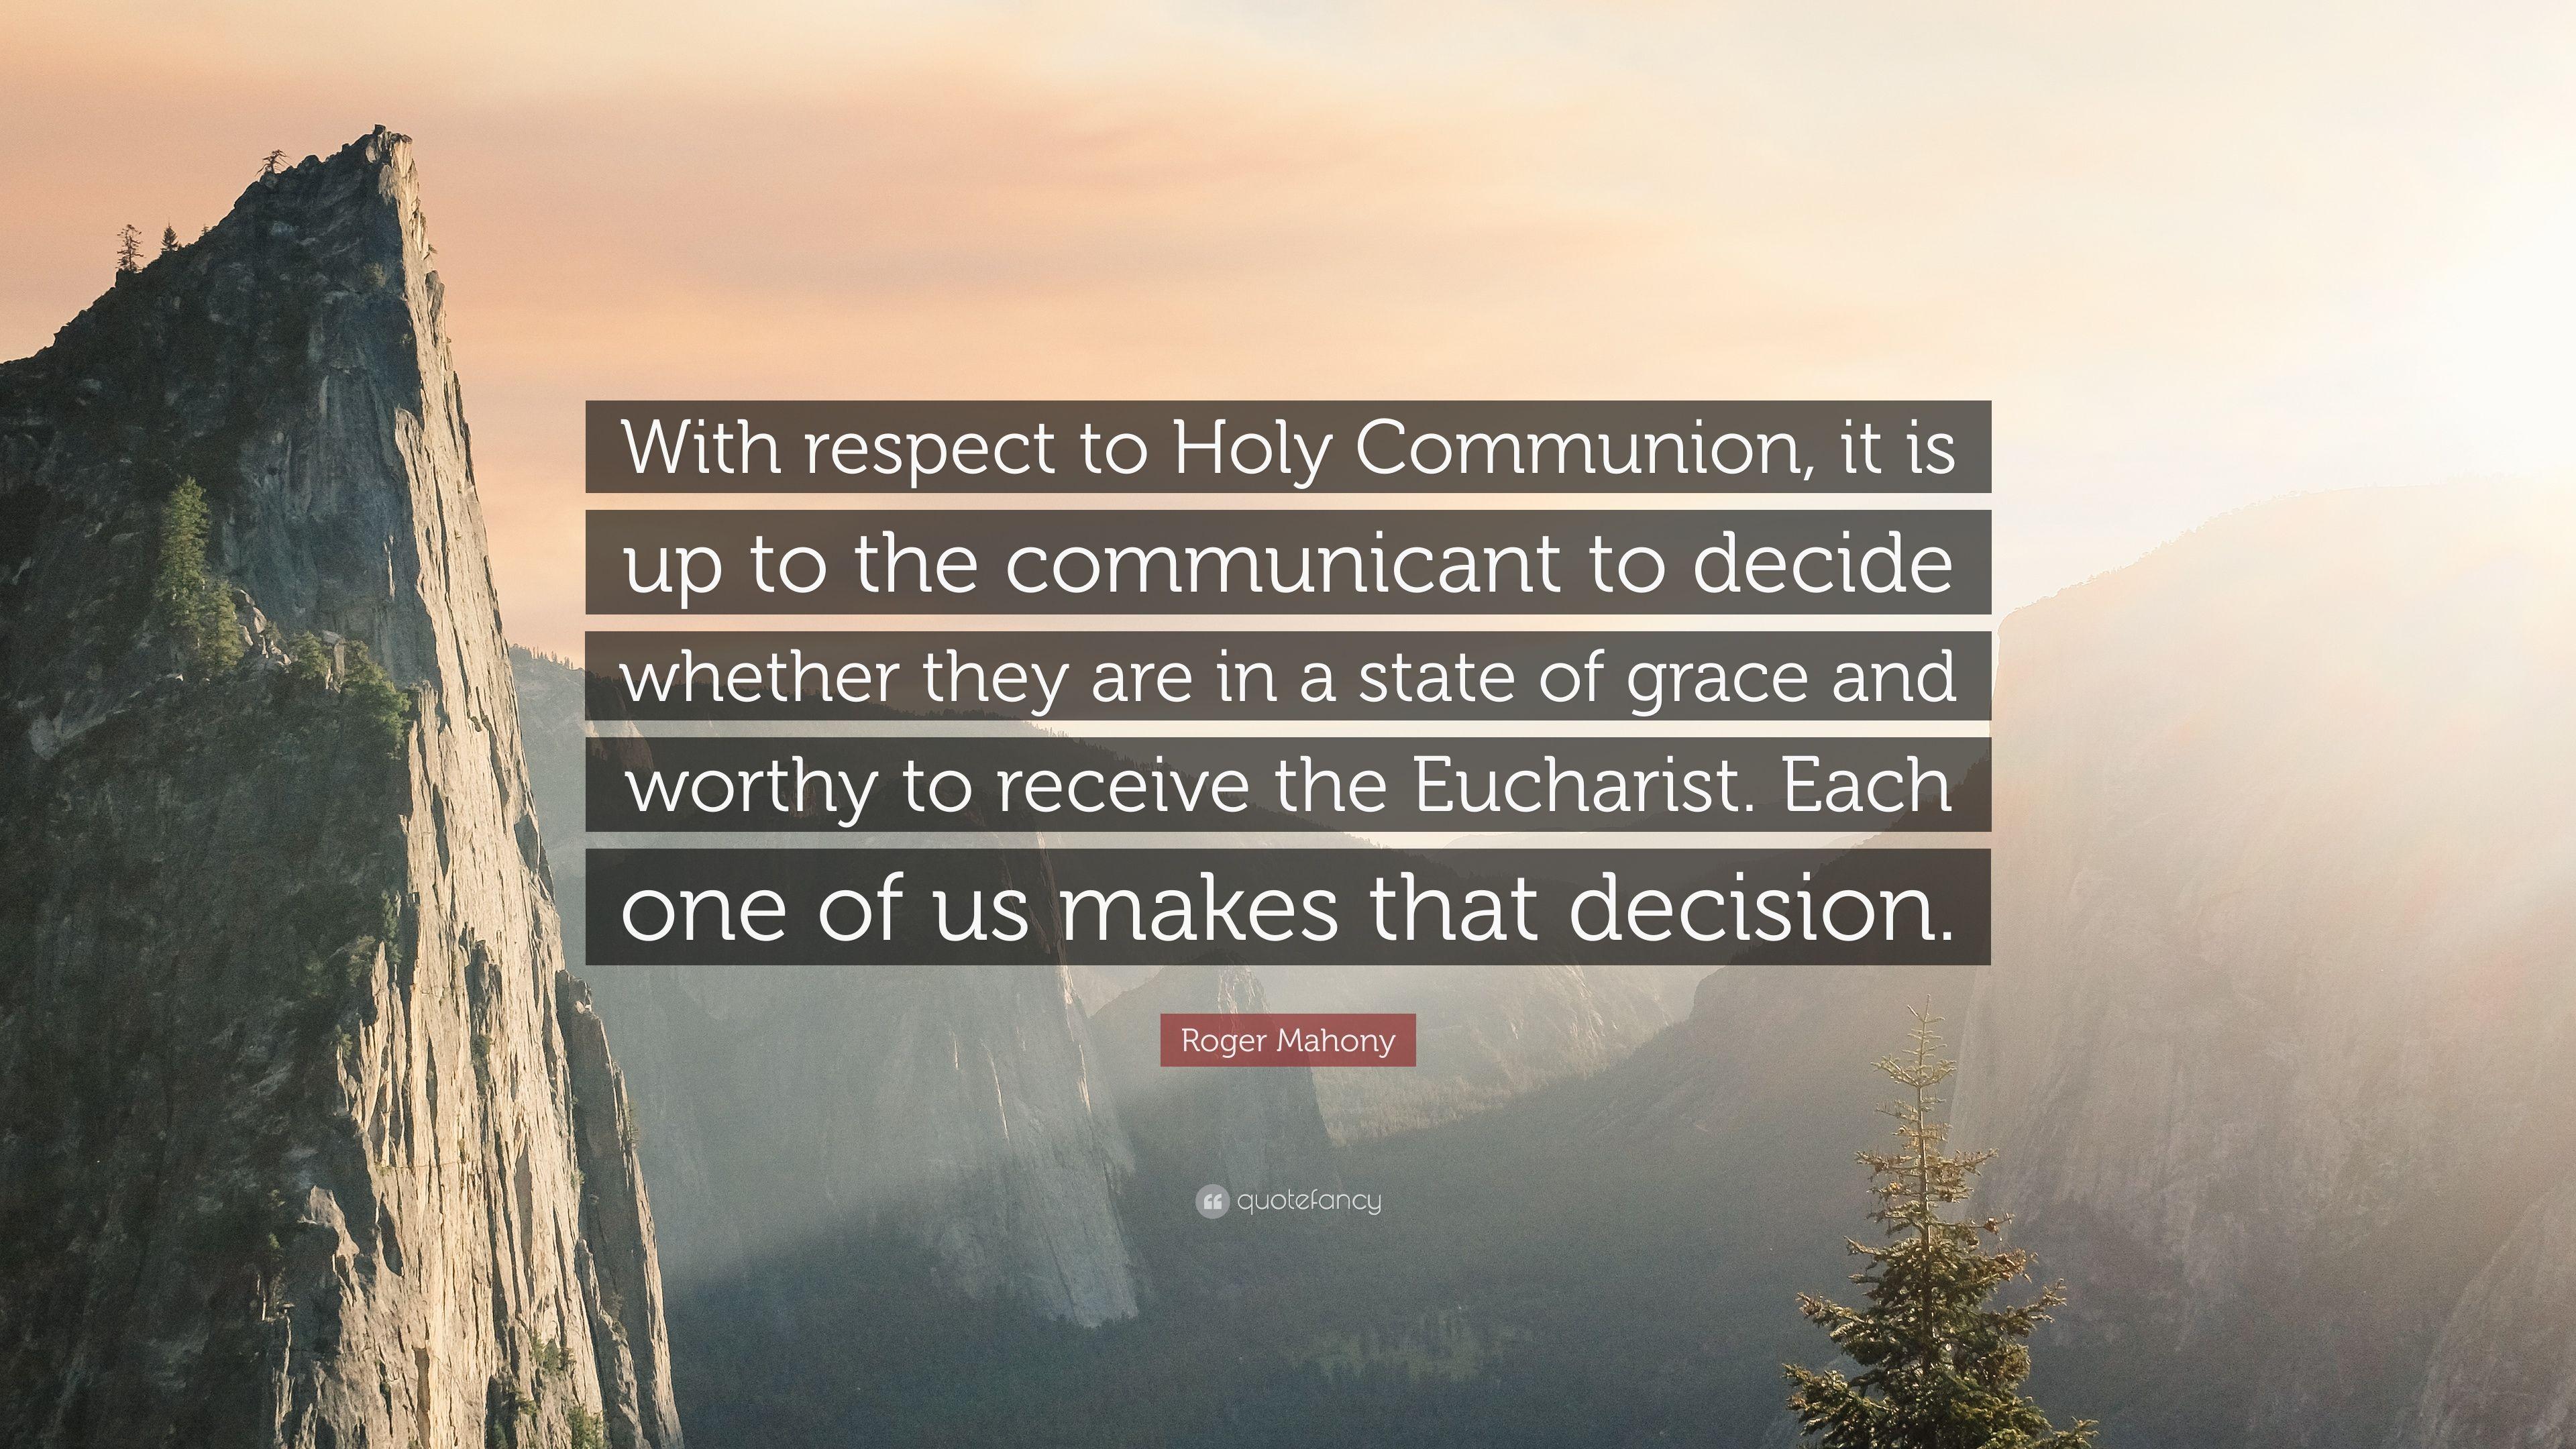 Roger Mahony Quote: “With respect to Holy Communion, it is up to